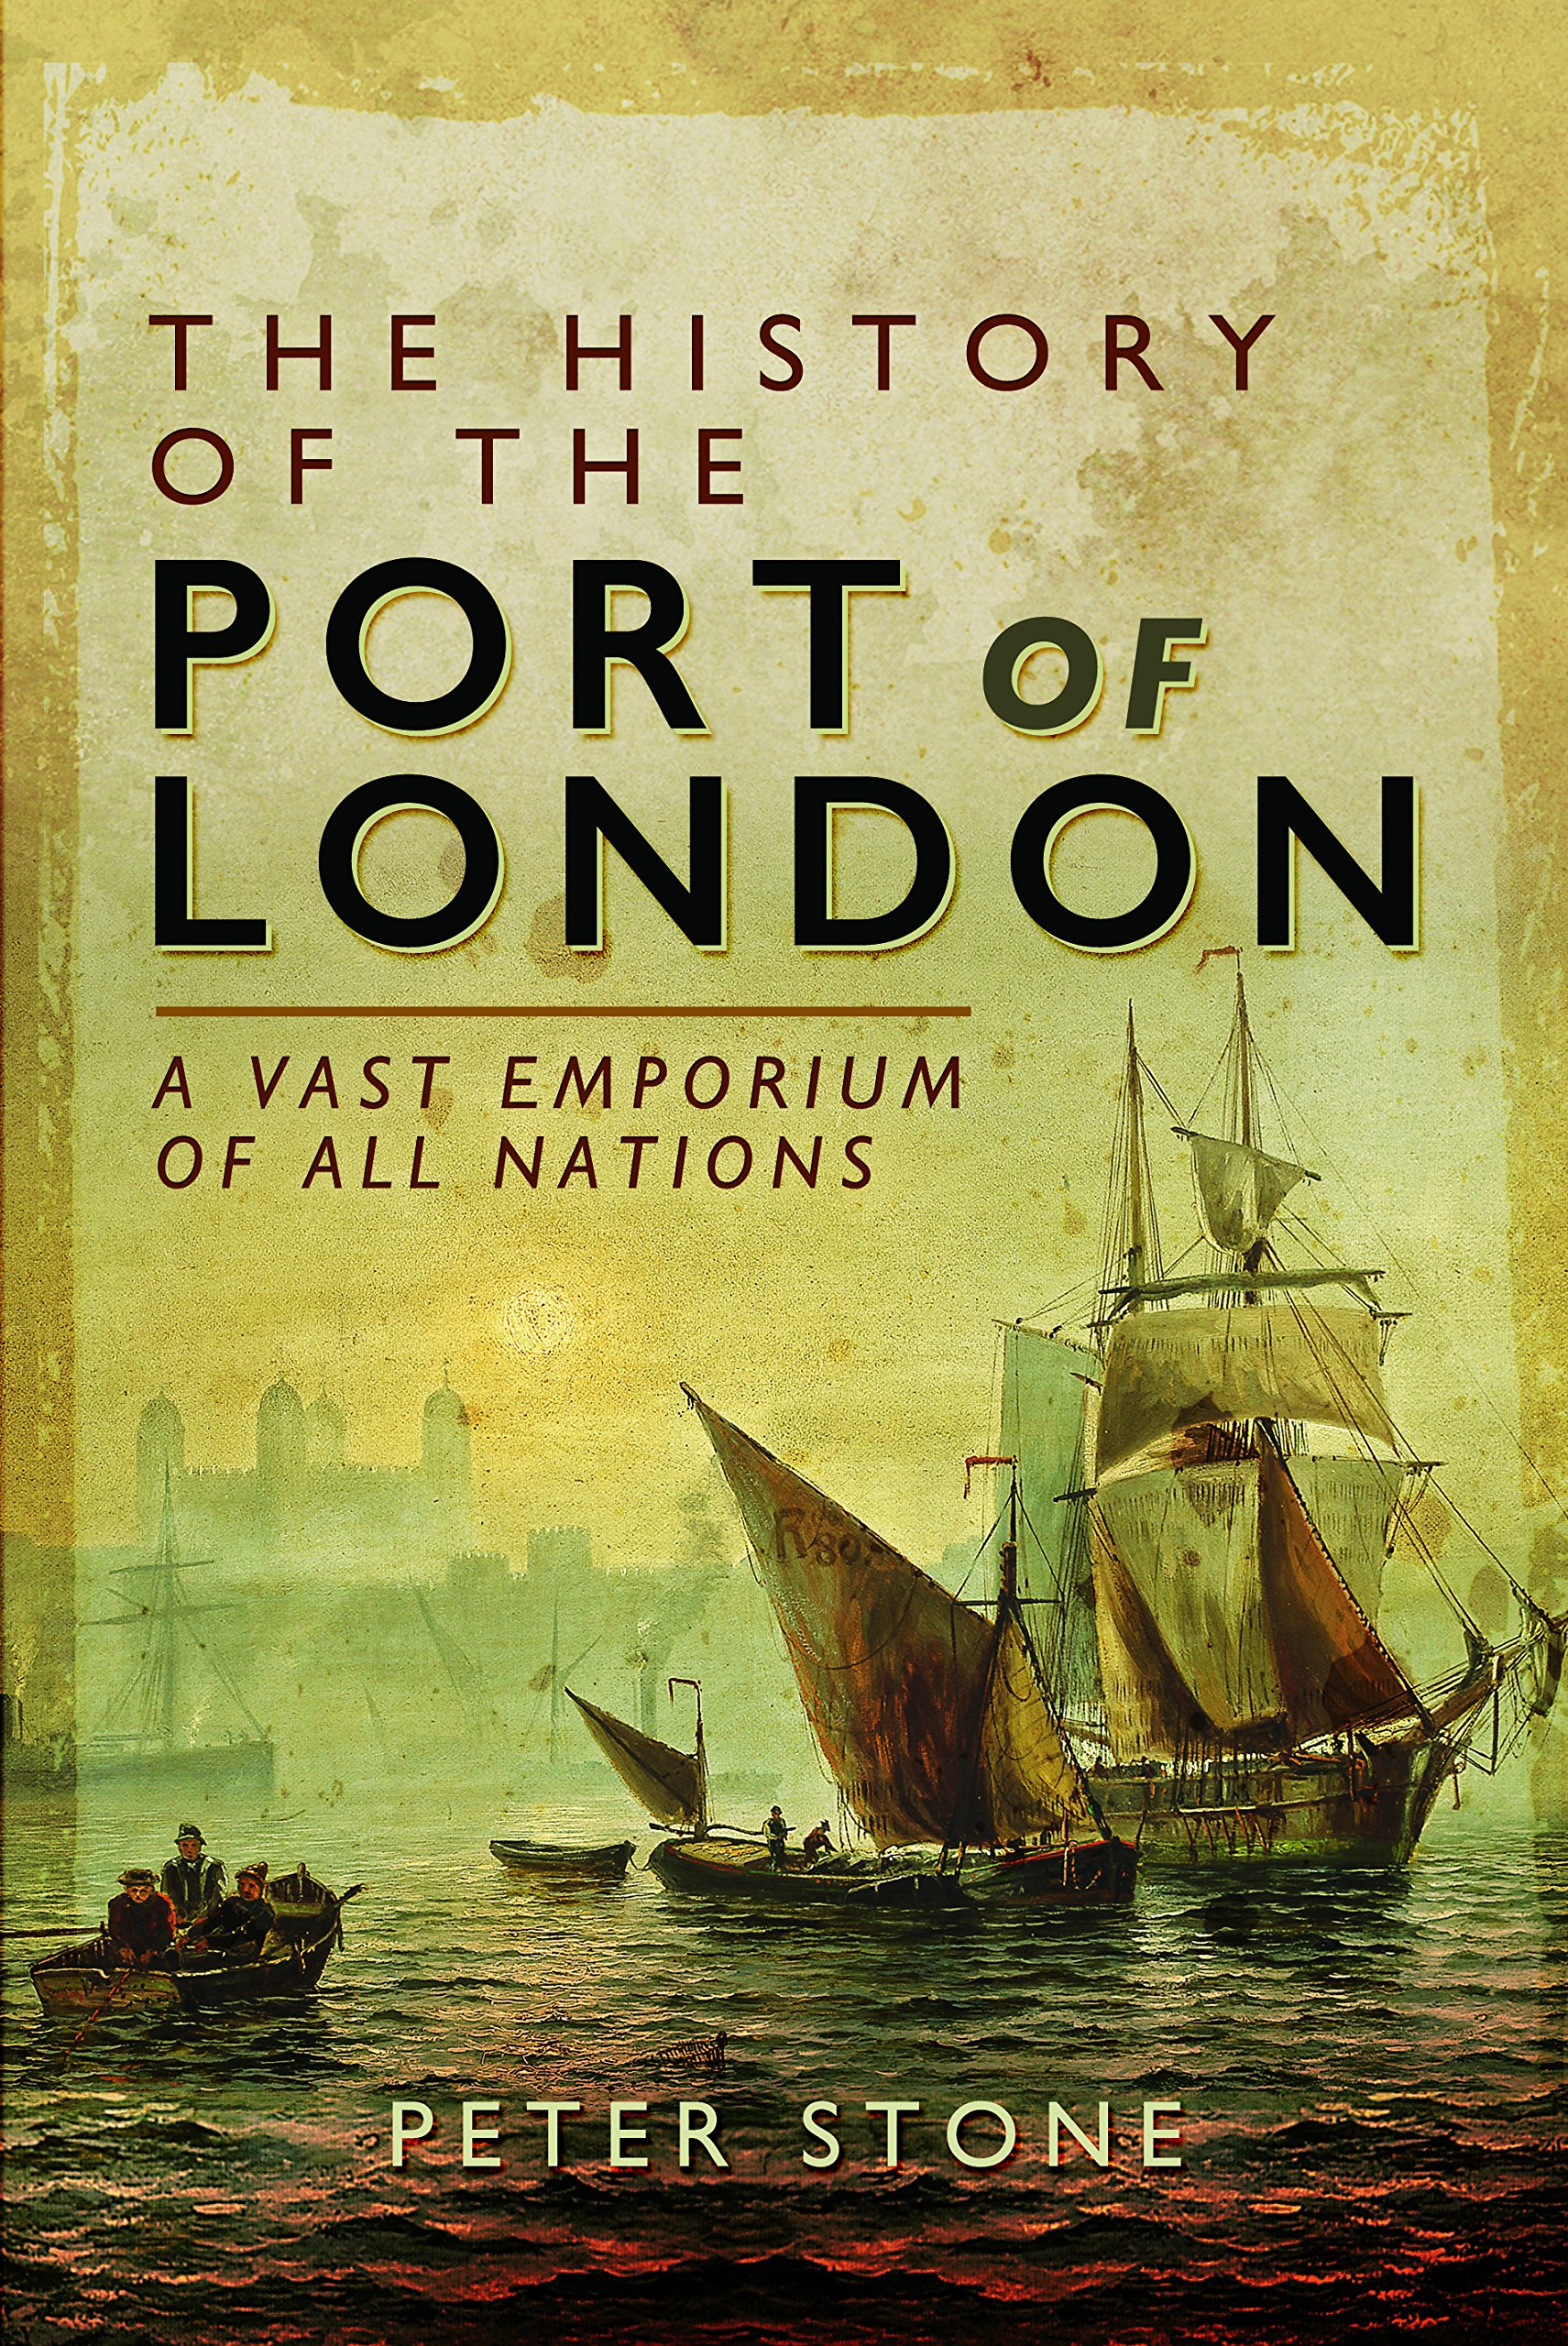 The History of the Port of London